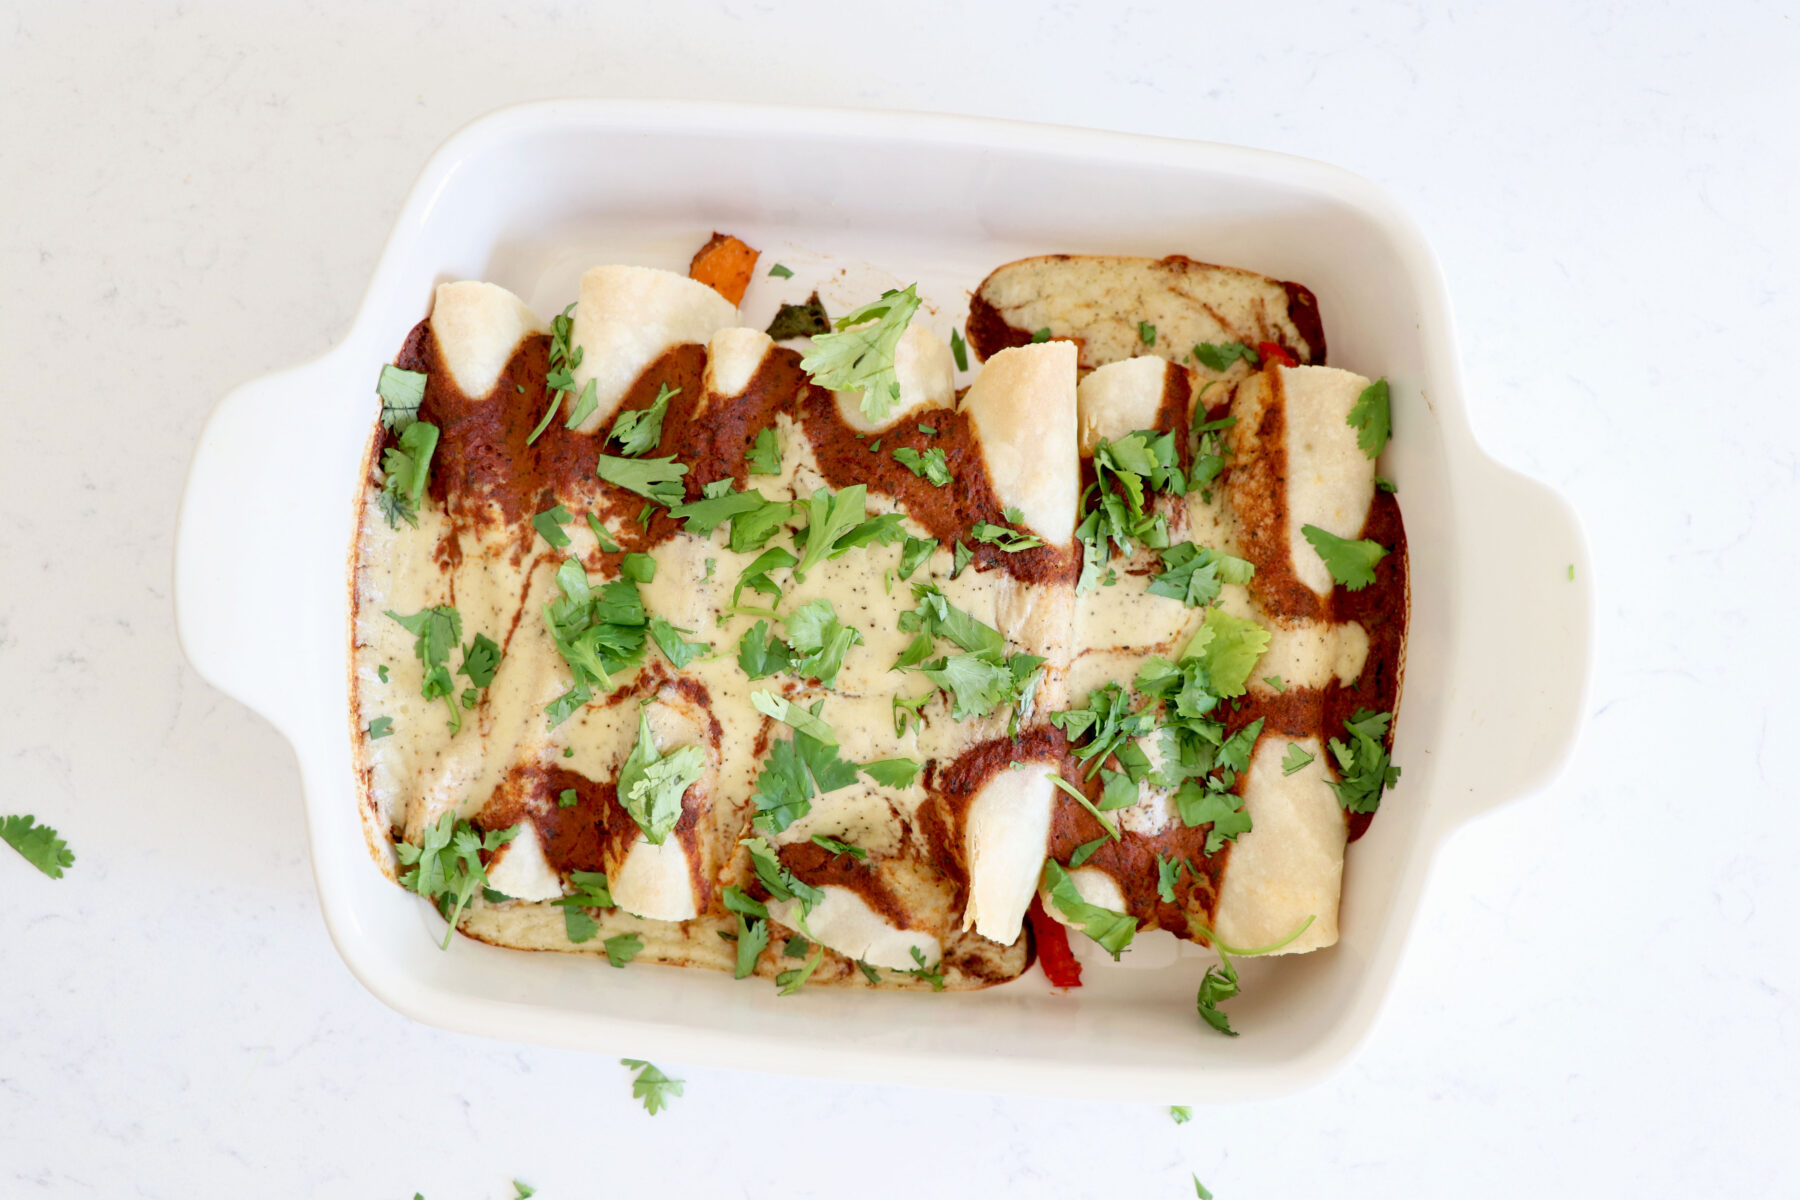 Baking dish with enchiladas covered with a red mole sauce and cashew cream sauce.